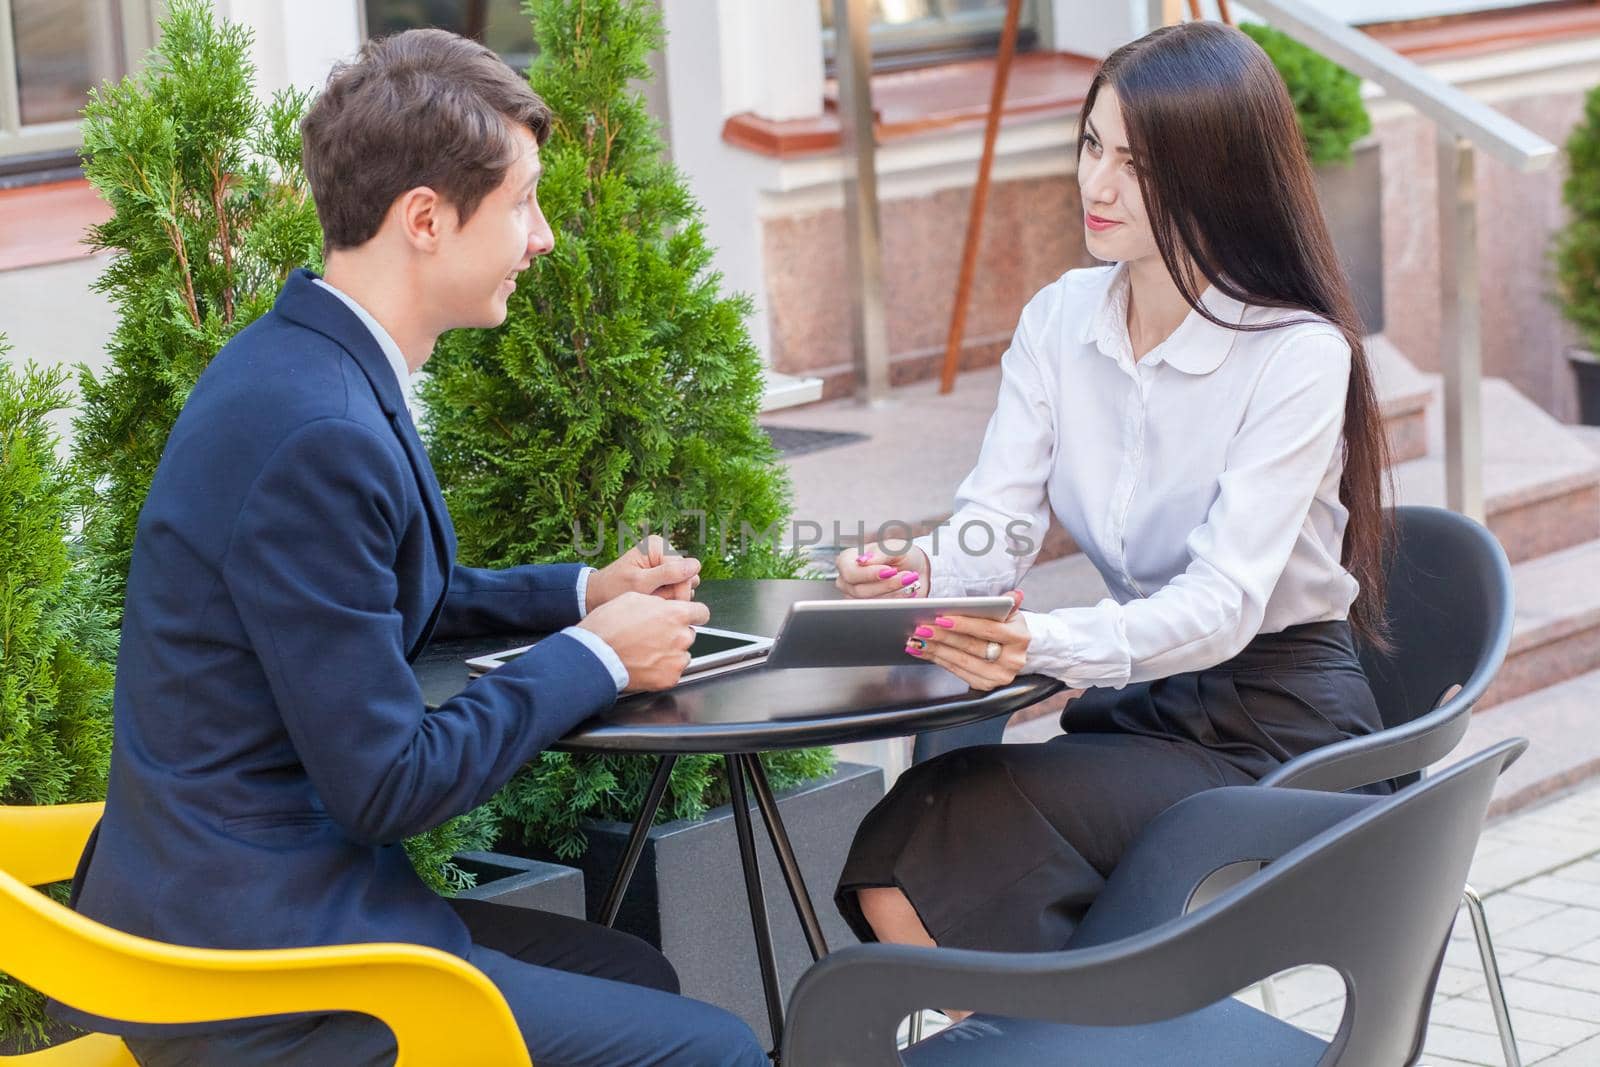 Two friends sitting outdoor in cafe thinking, looking at tablet and discussing their business.